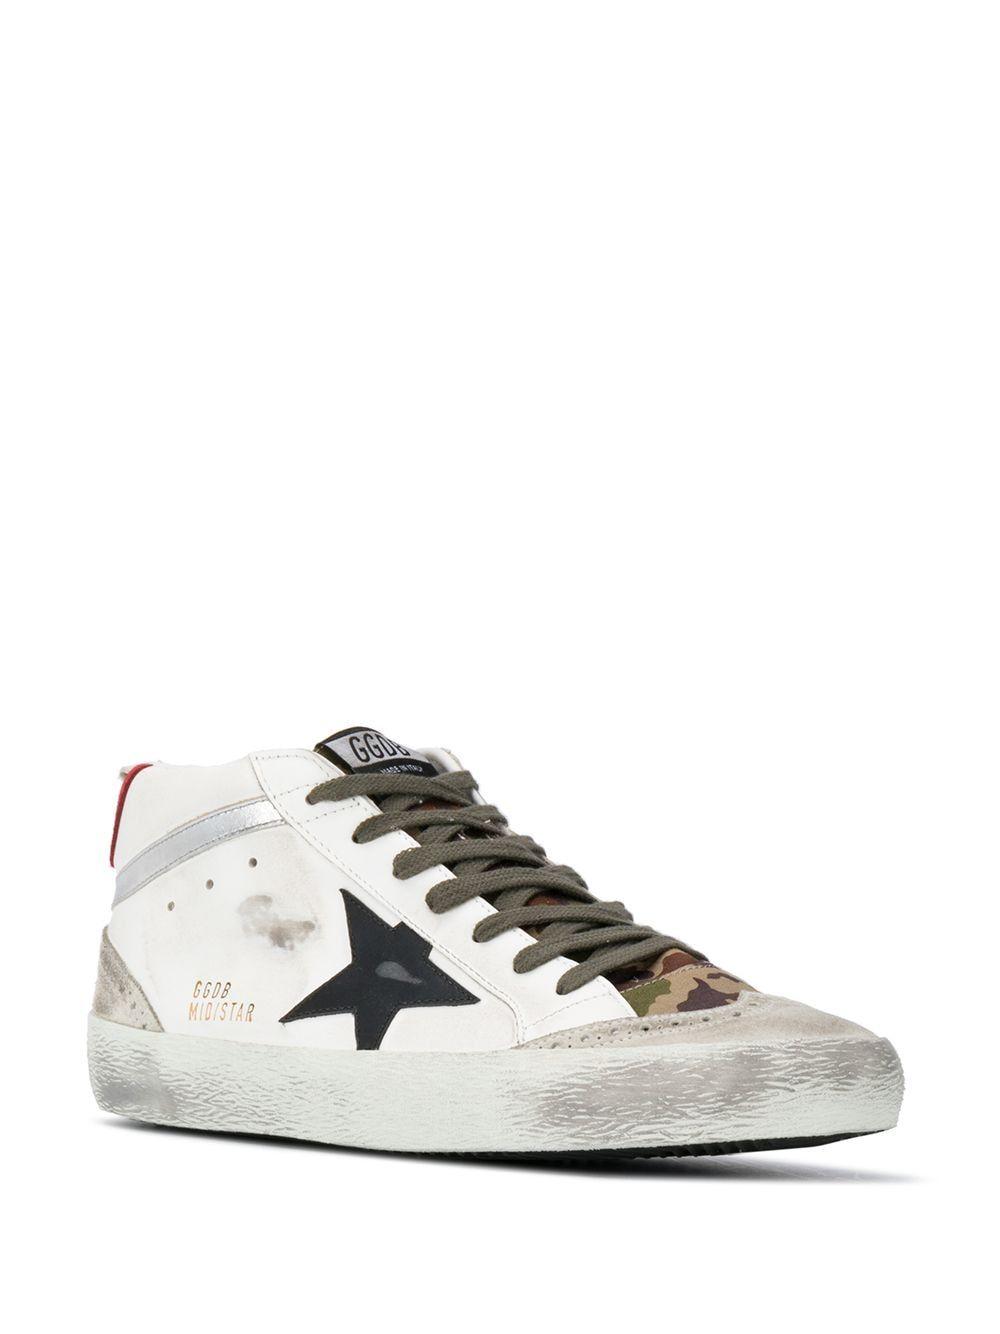 Golden Goose Deluxe Brand Goose Leather Hi Top Sneakers in White for ...